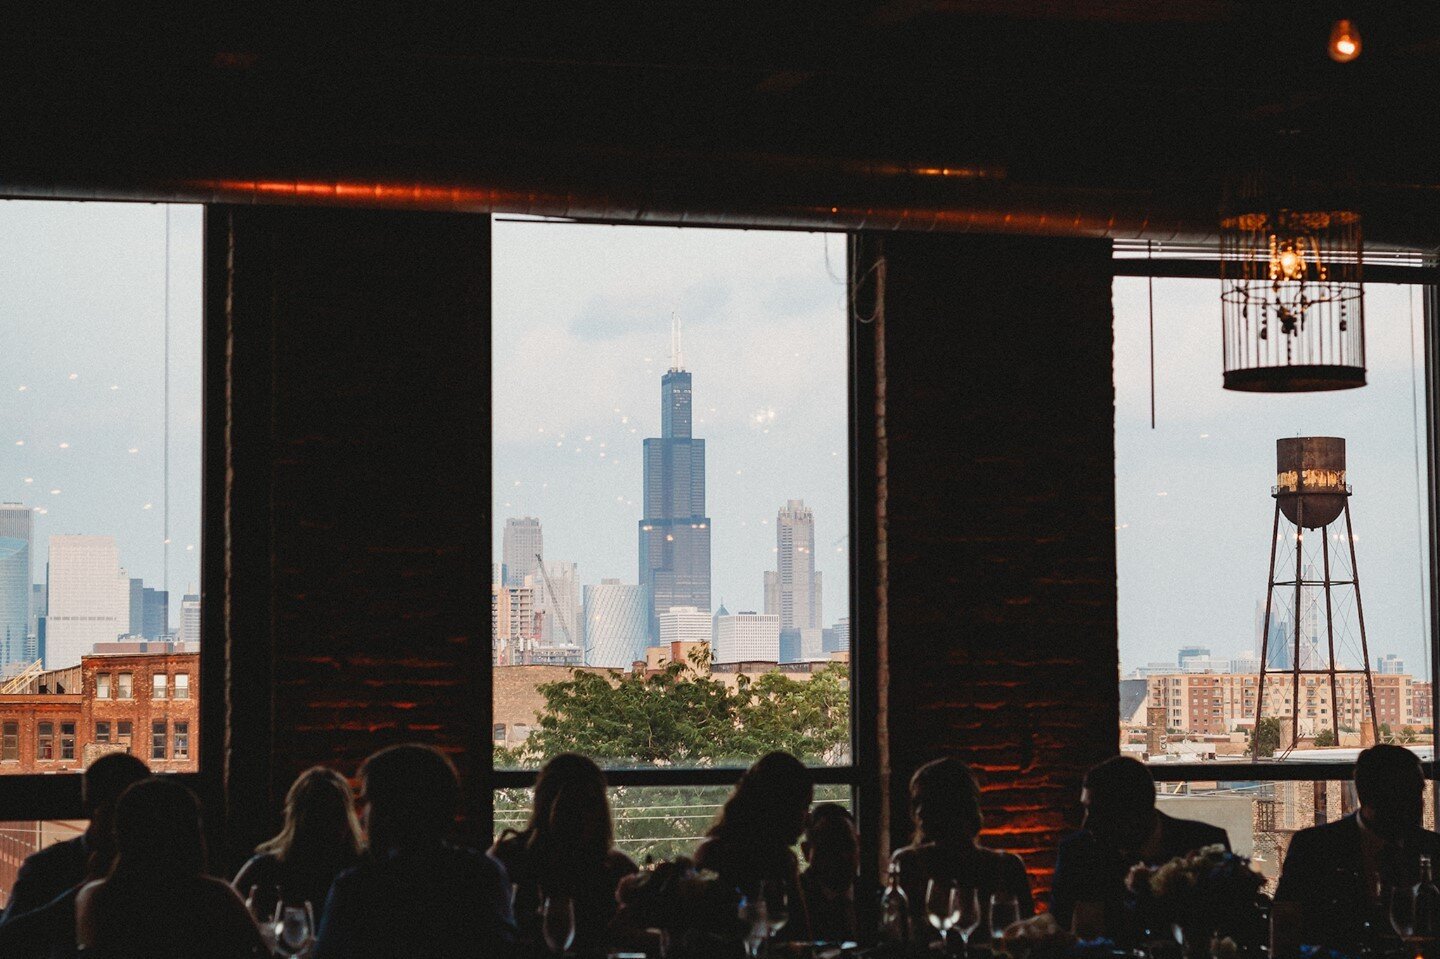 &quot;Eventually, I think Chicago will be the most beautiful great city left in the world&quot; - Frank Lloyd Wright
📸 @CatturaWeddings 
#cityviewloft #lmcaters #loftwedding #chicagoeventvenue #chicagoskyline
.
.
.
.
#realwedding #wedding #happilyev